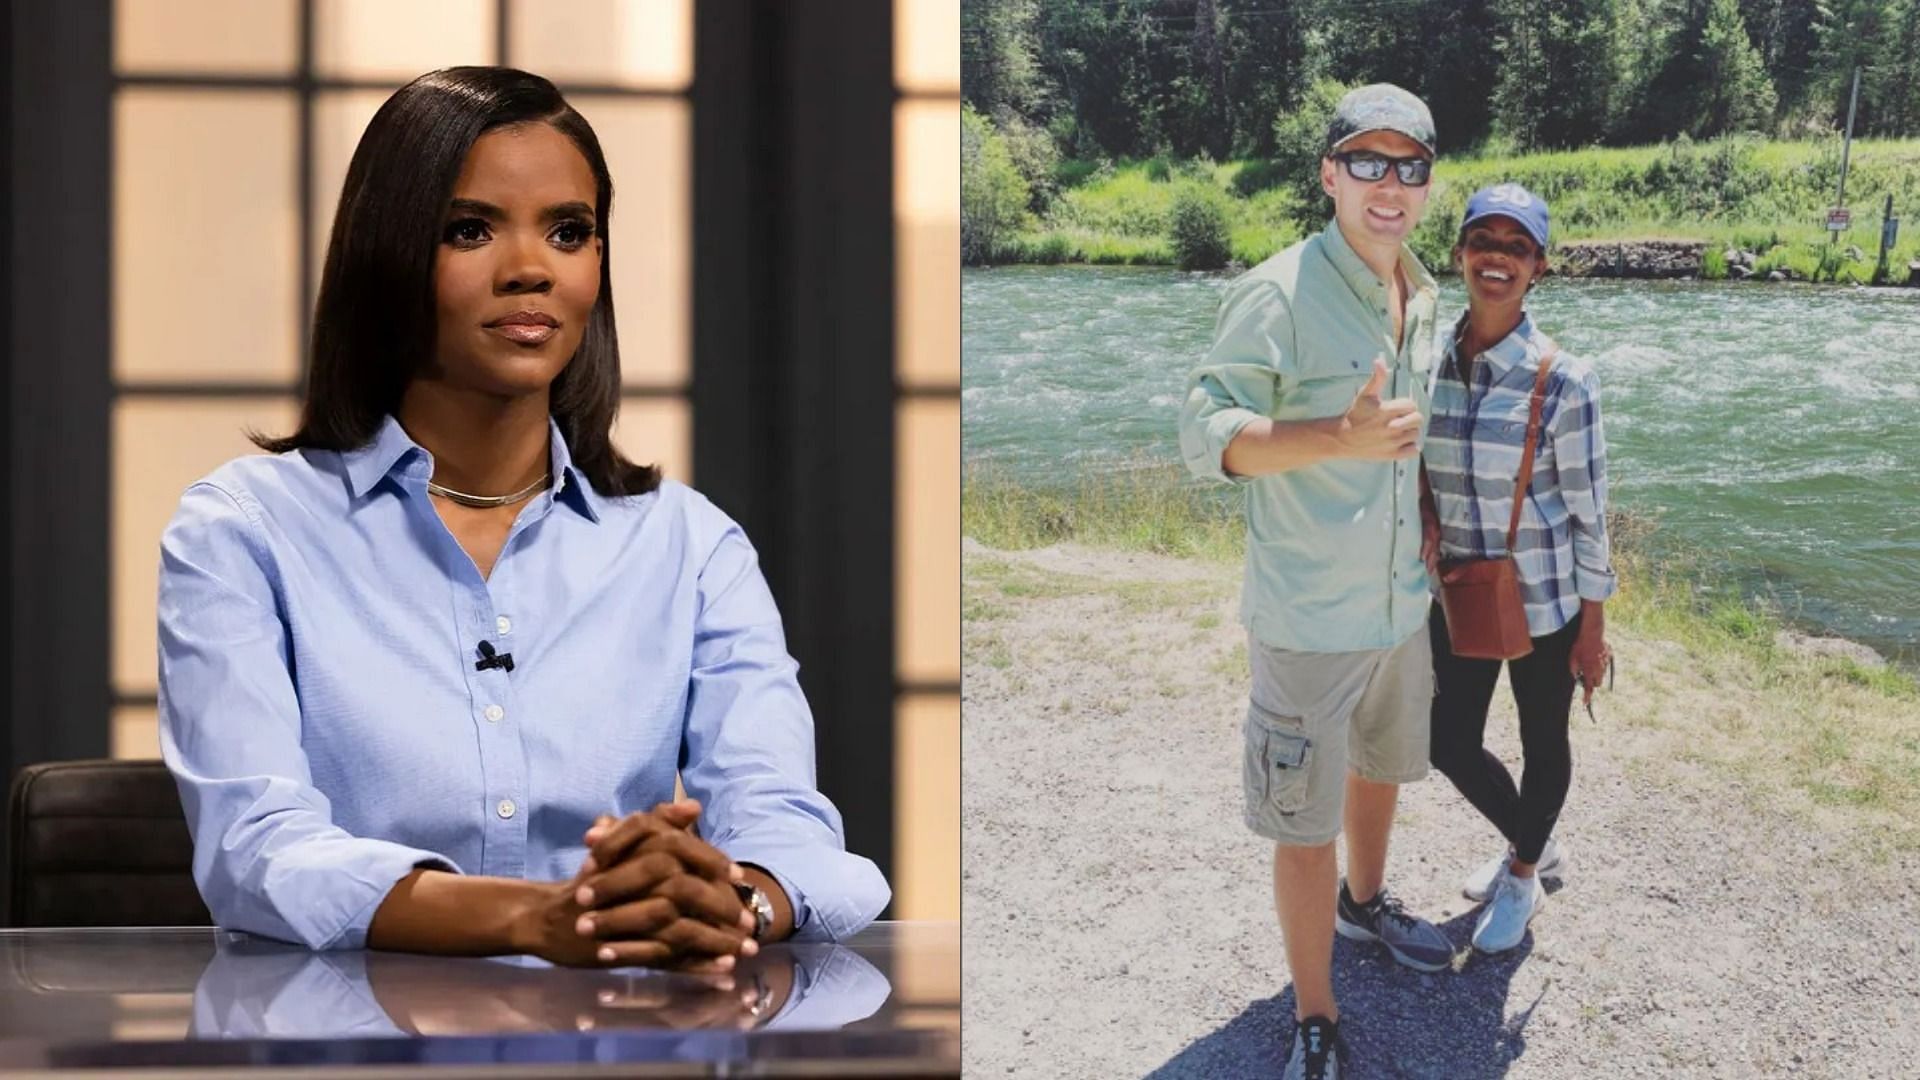 Candace Owens welcomed her first child with husband George Farmer in January 2021 (Image via Brett Carlsen/Getty Images and realcandaceowens/Instagram)